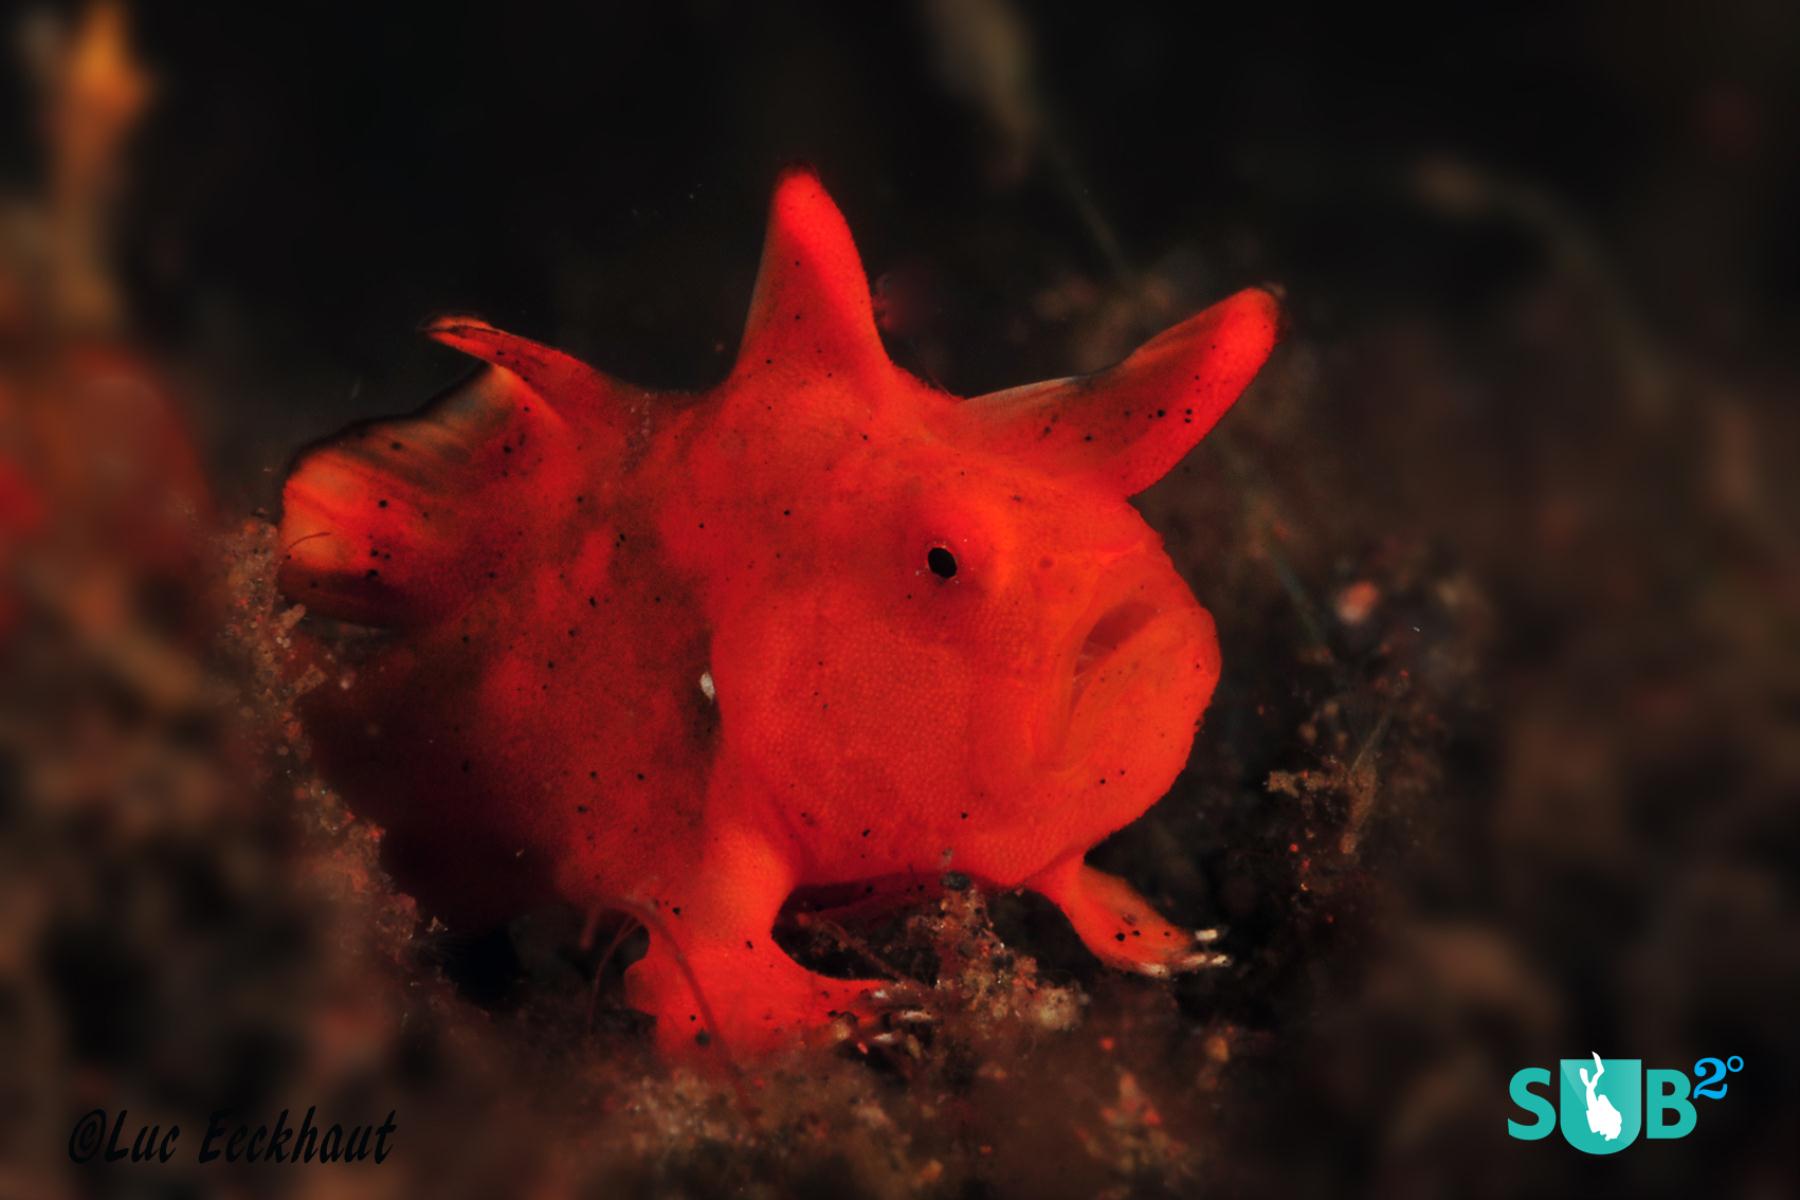 Frogfish can change into different colours and are difficult to spot, but here's a little red one I spotted.  (Nikon D300s - 1/60sec - #40 - 105mm lens)